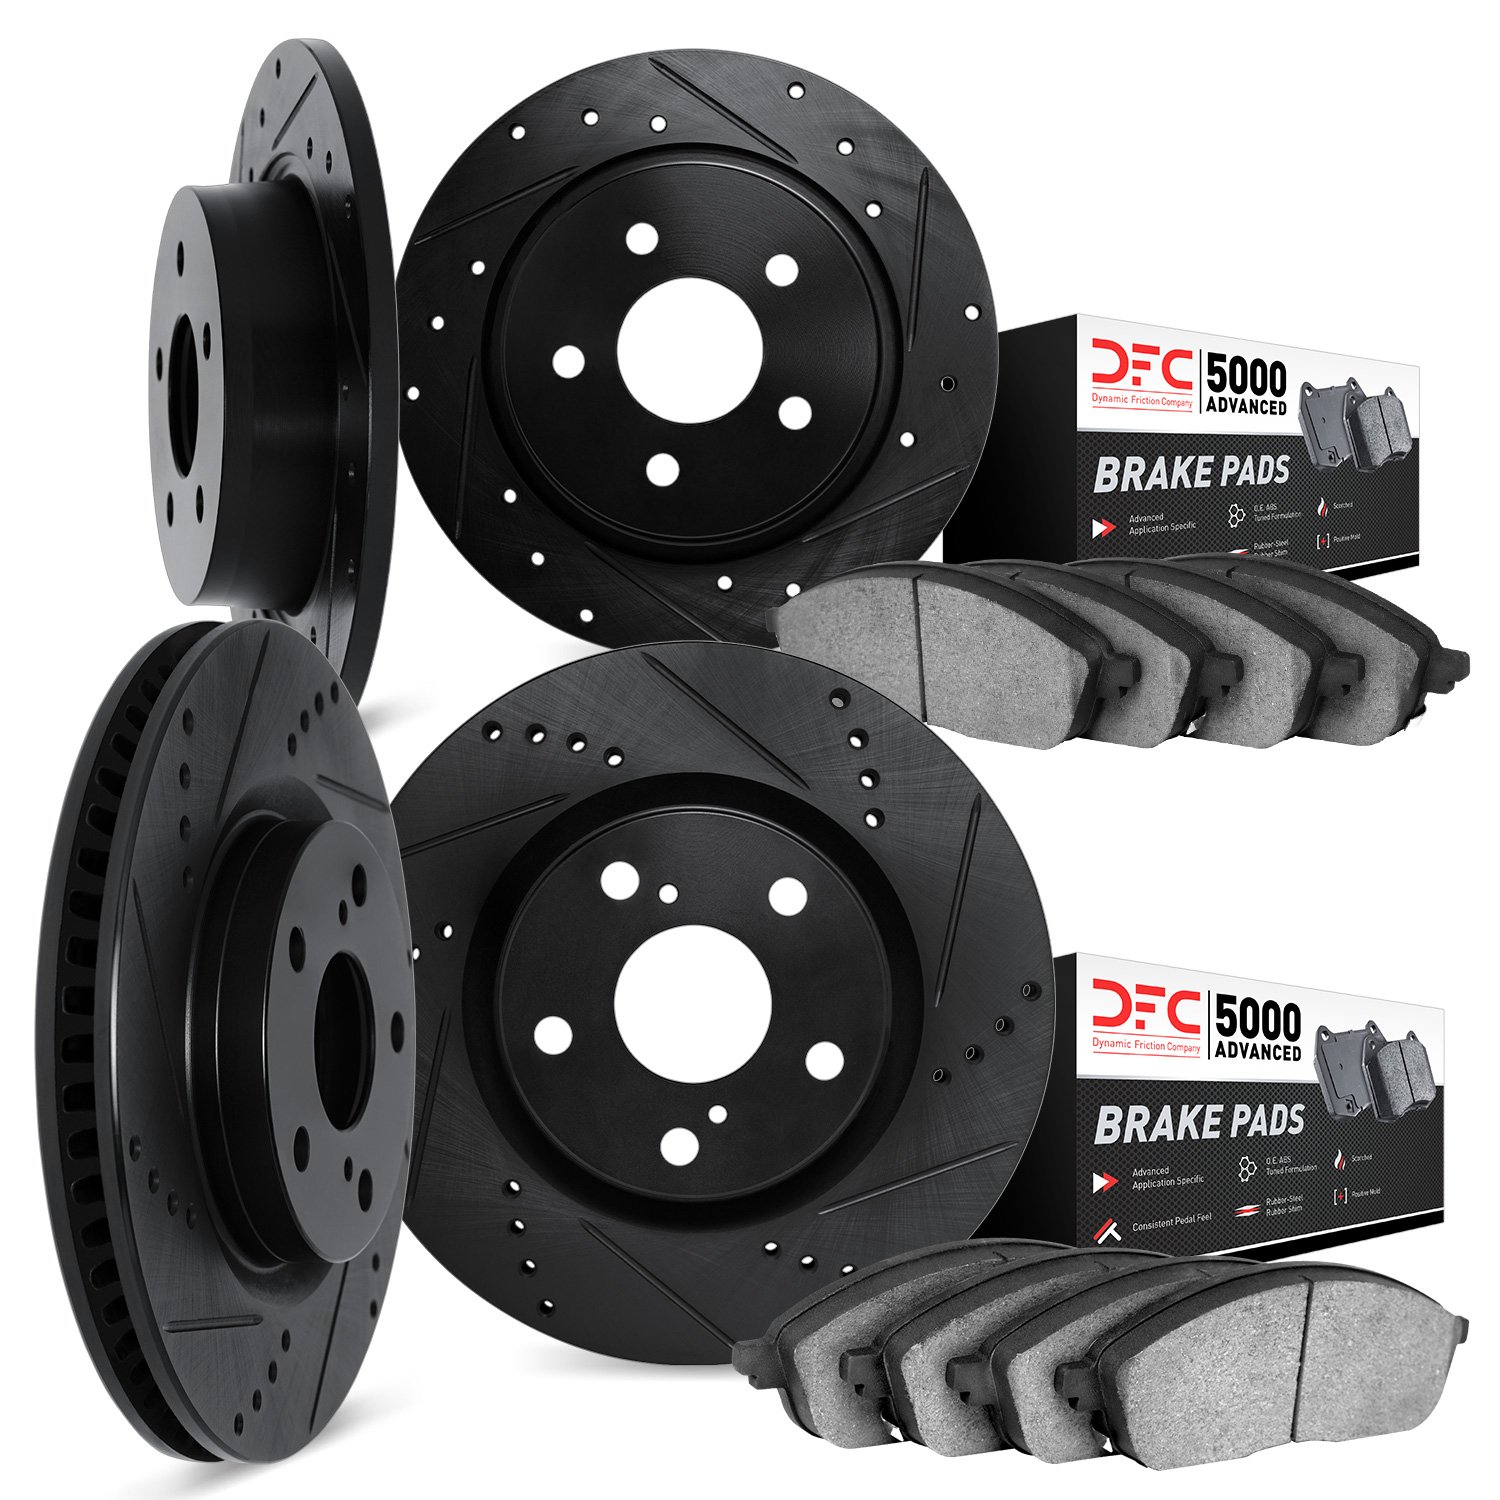 8504-76147 Drilled/Slotted Brake Rotors w/5000 Advanced Brake Pads Kit [Black], 2000-2005 Lexus/Toyota/Scion, Position: Front an